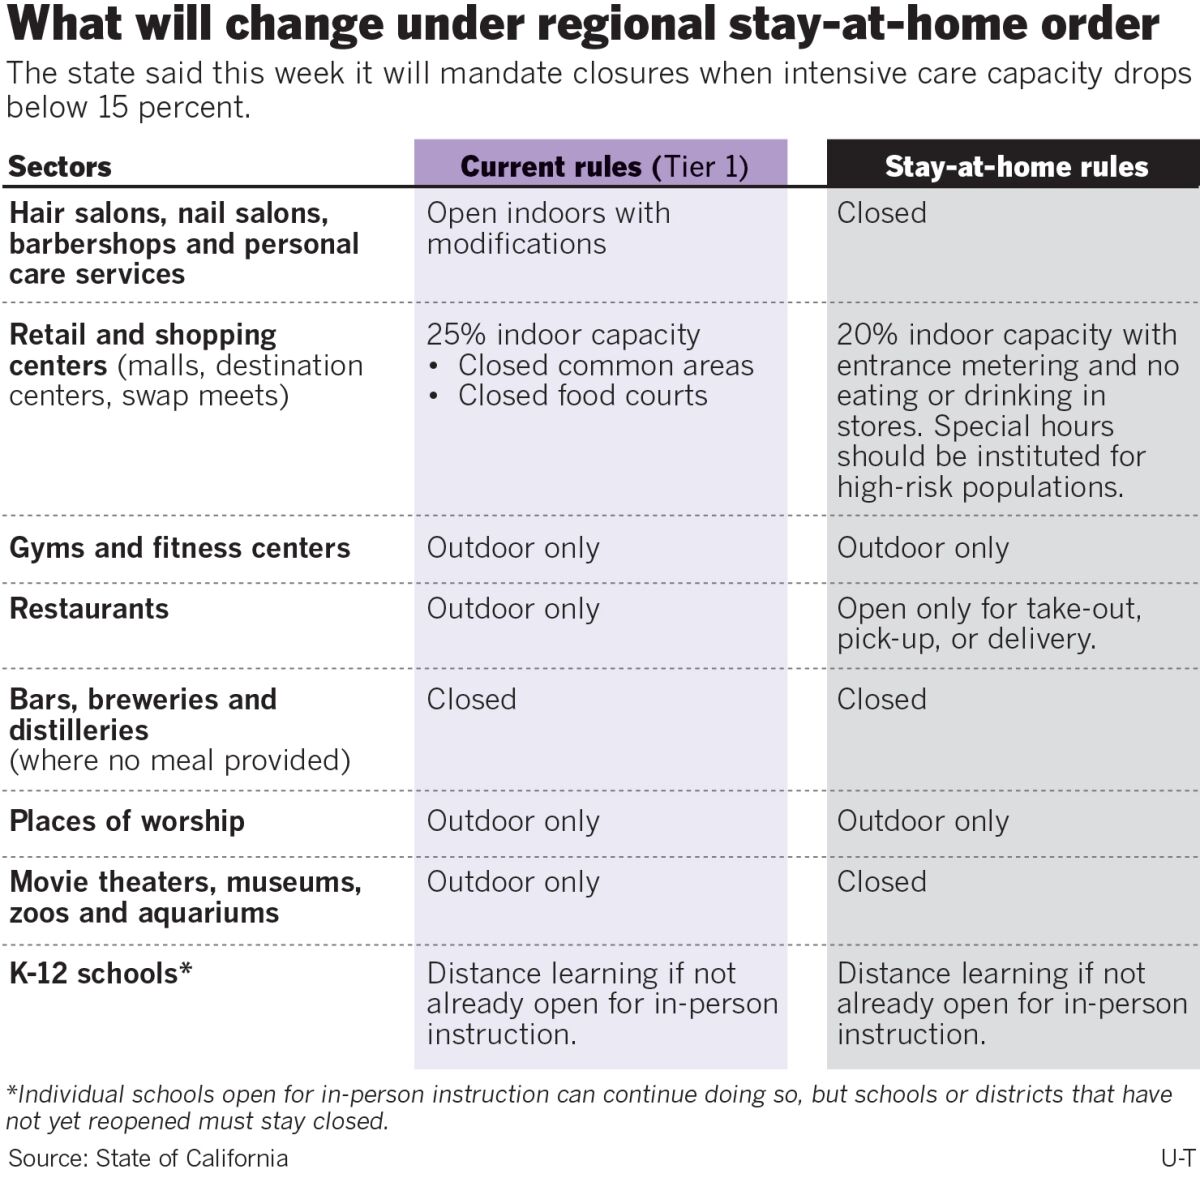 What will change under regional stay-at-home orders